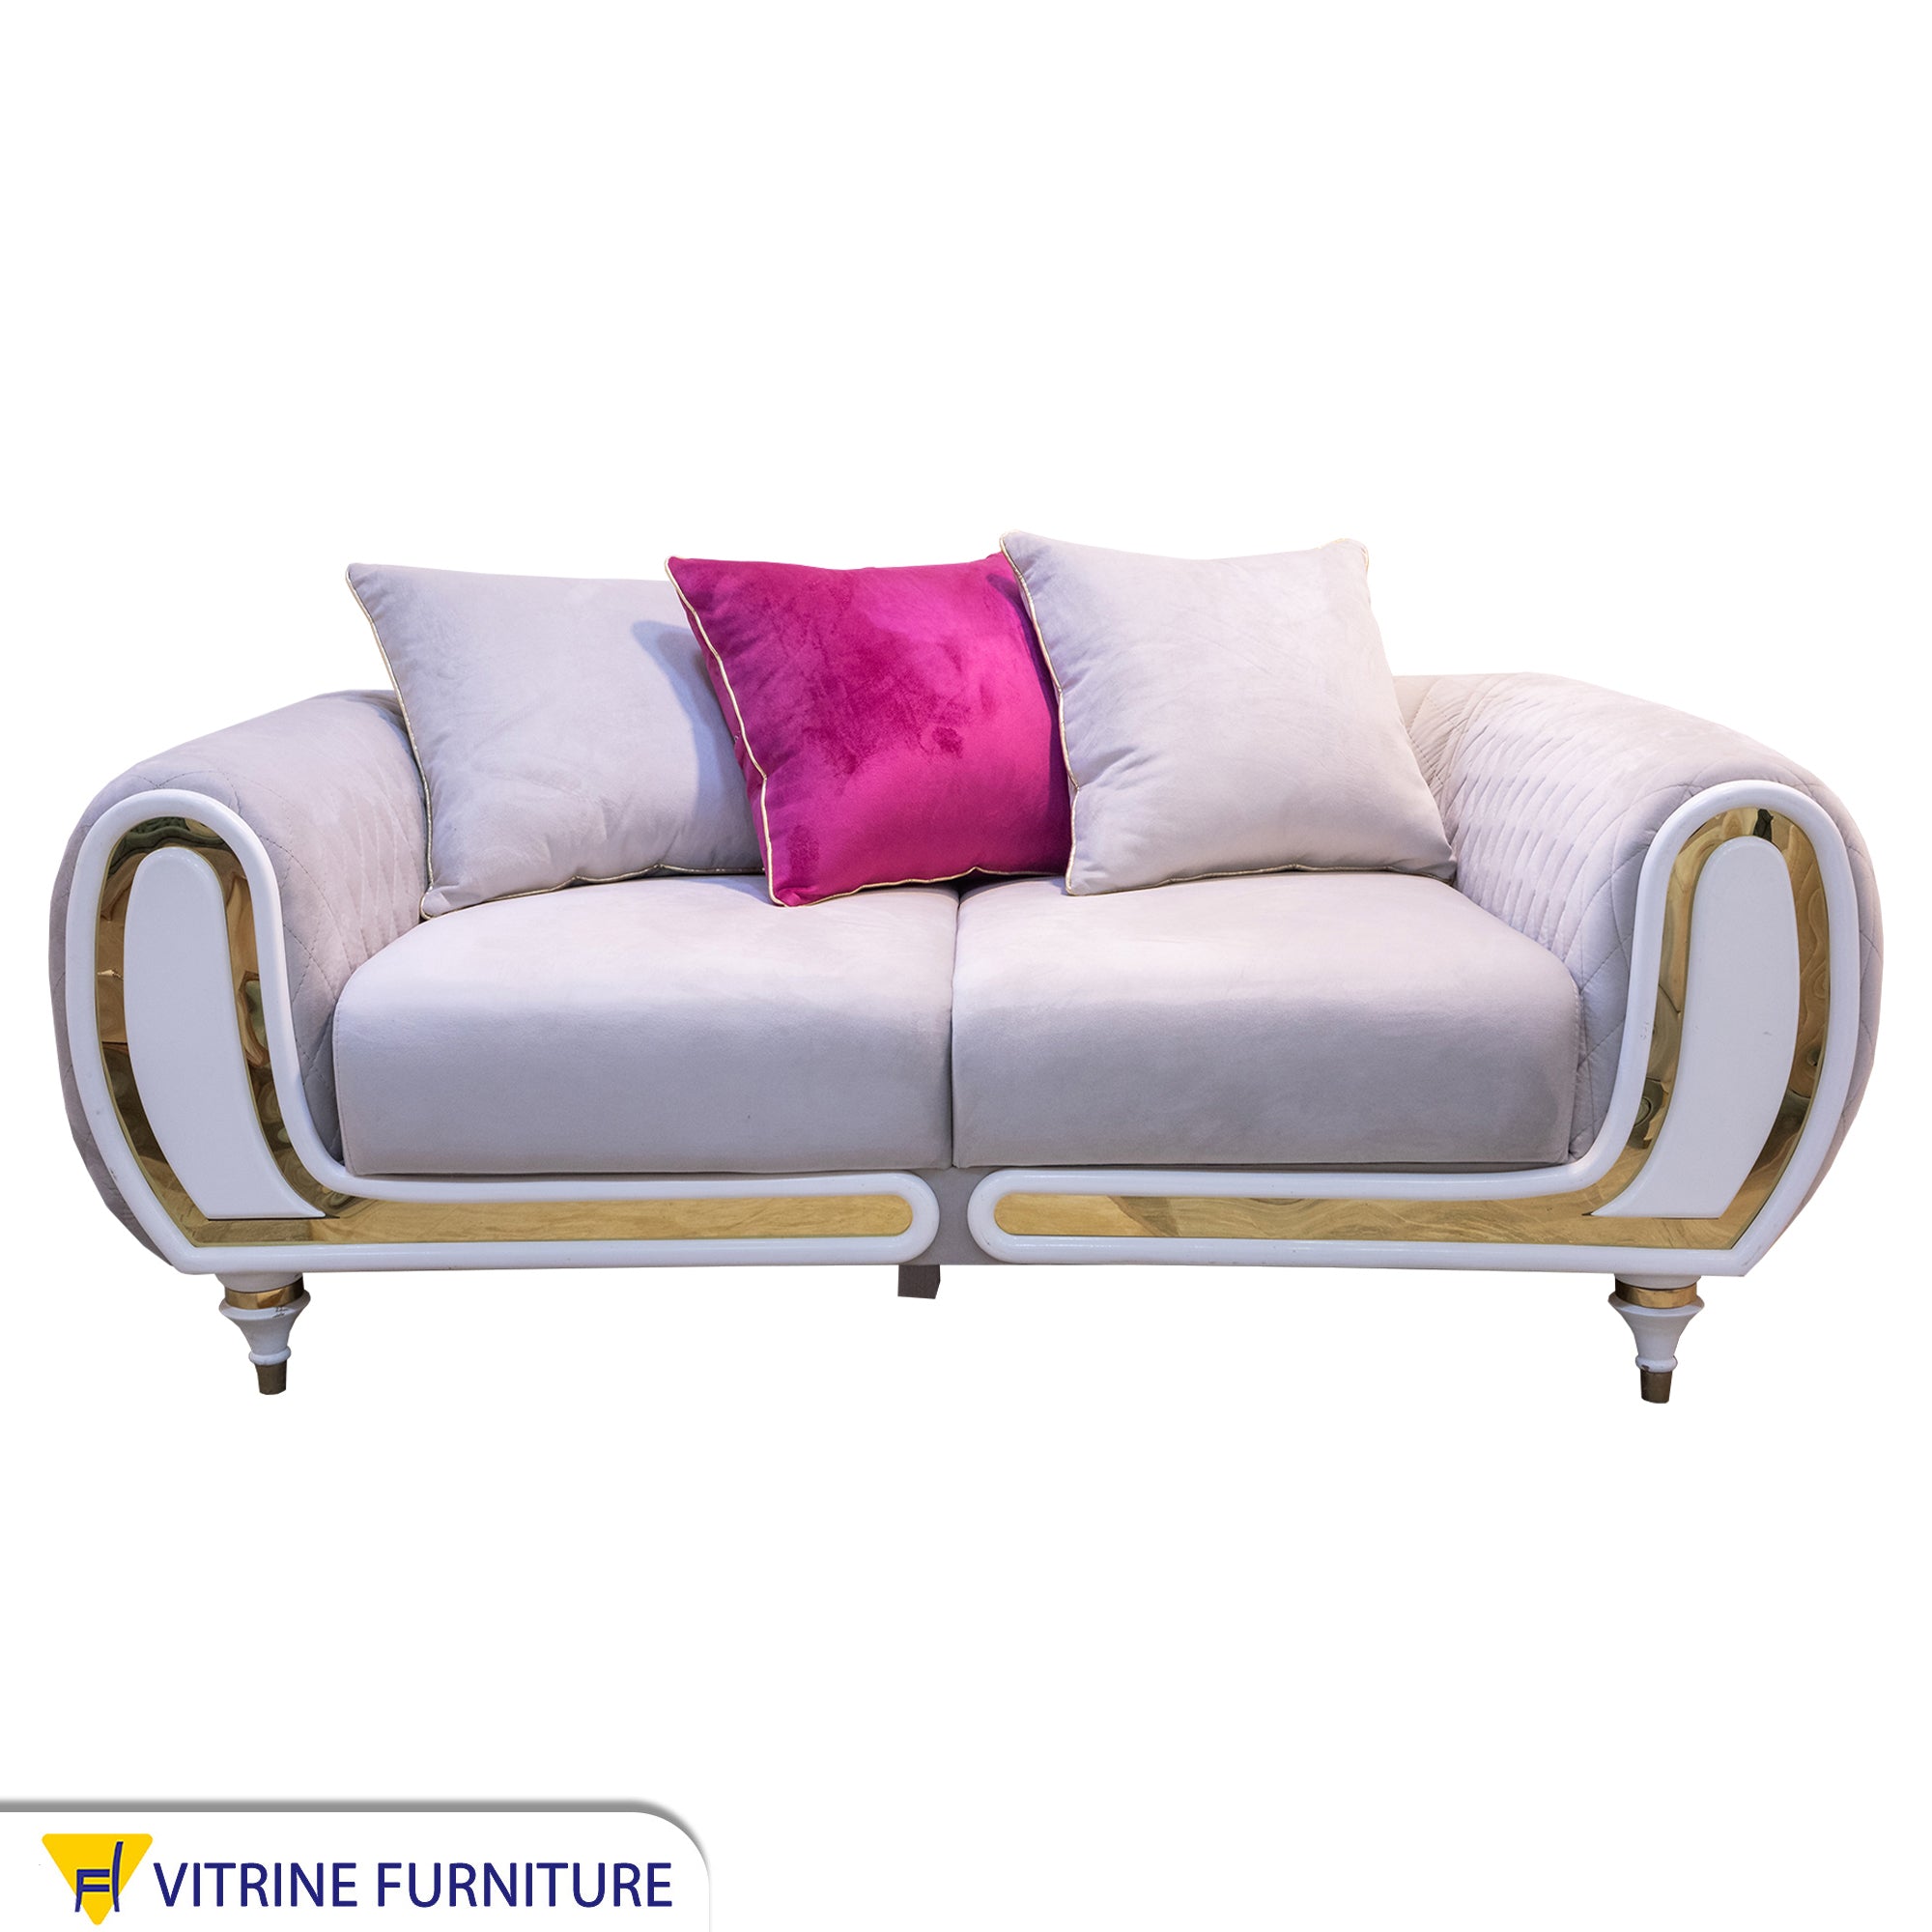 Living room White and golden accents fuchsia pillow